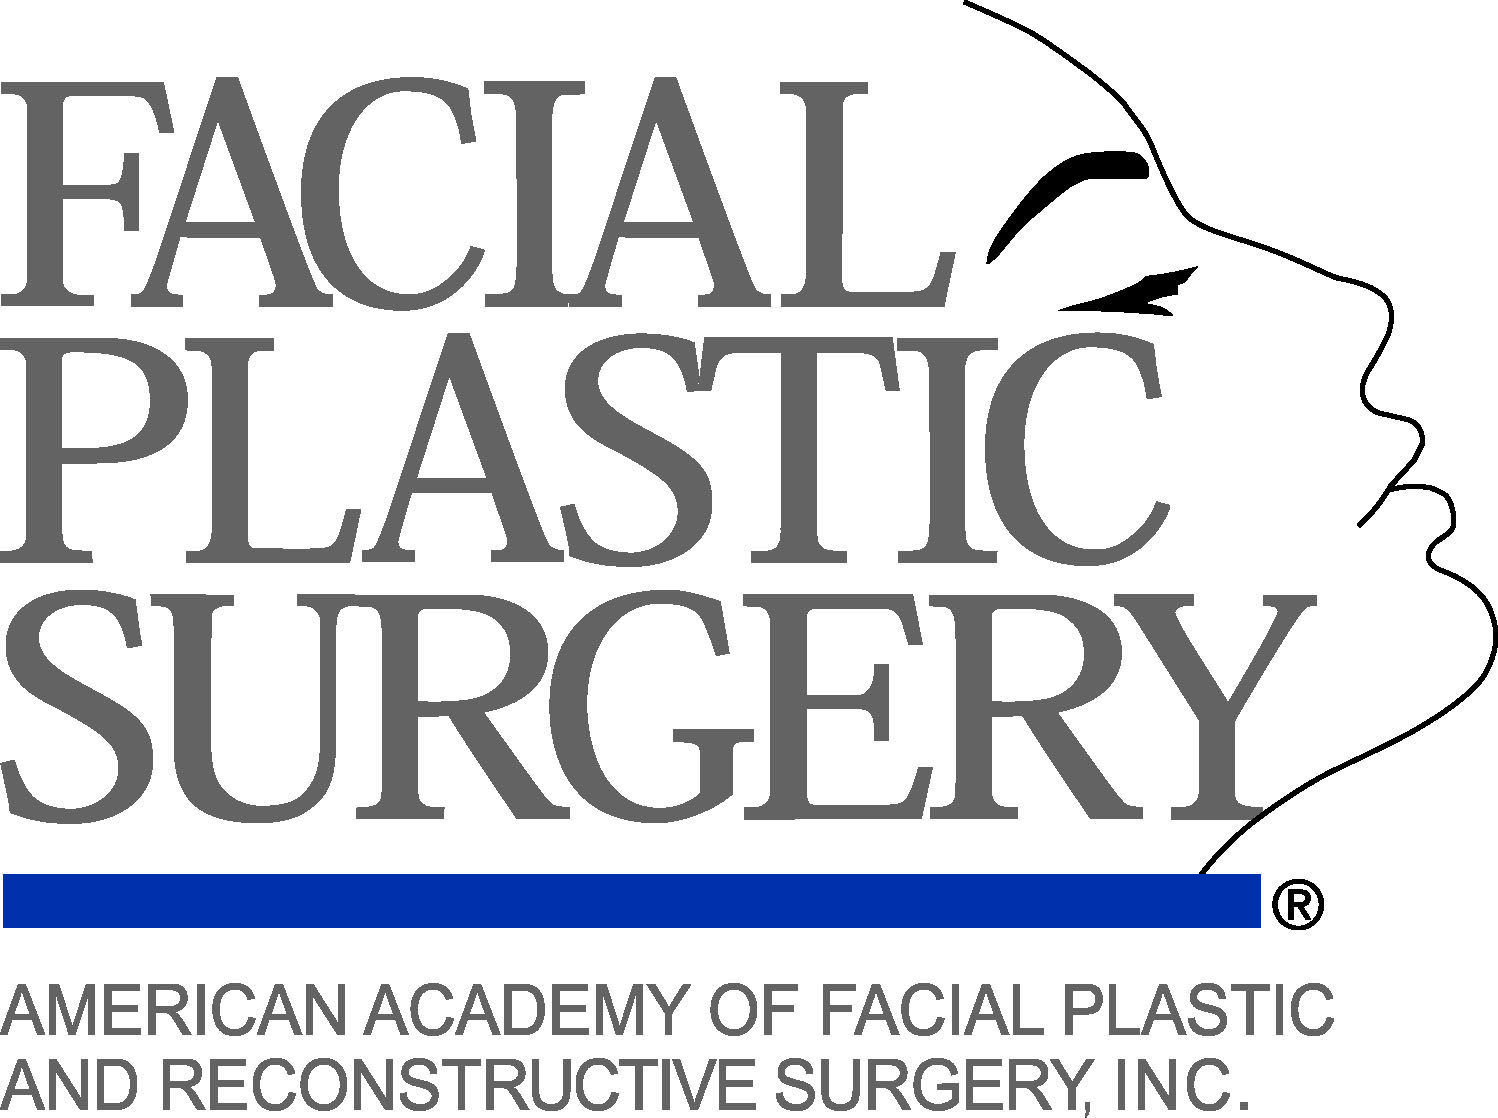 American board of facial plastic and